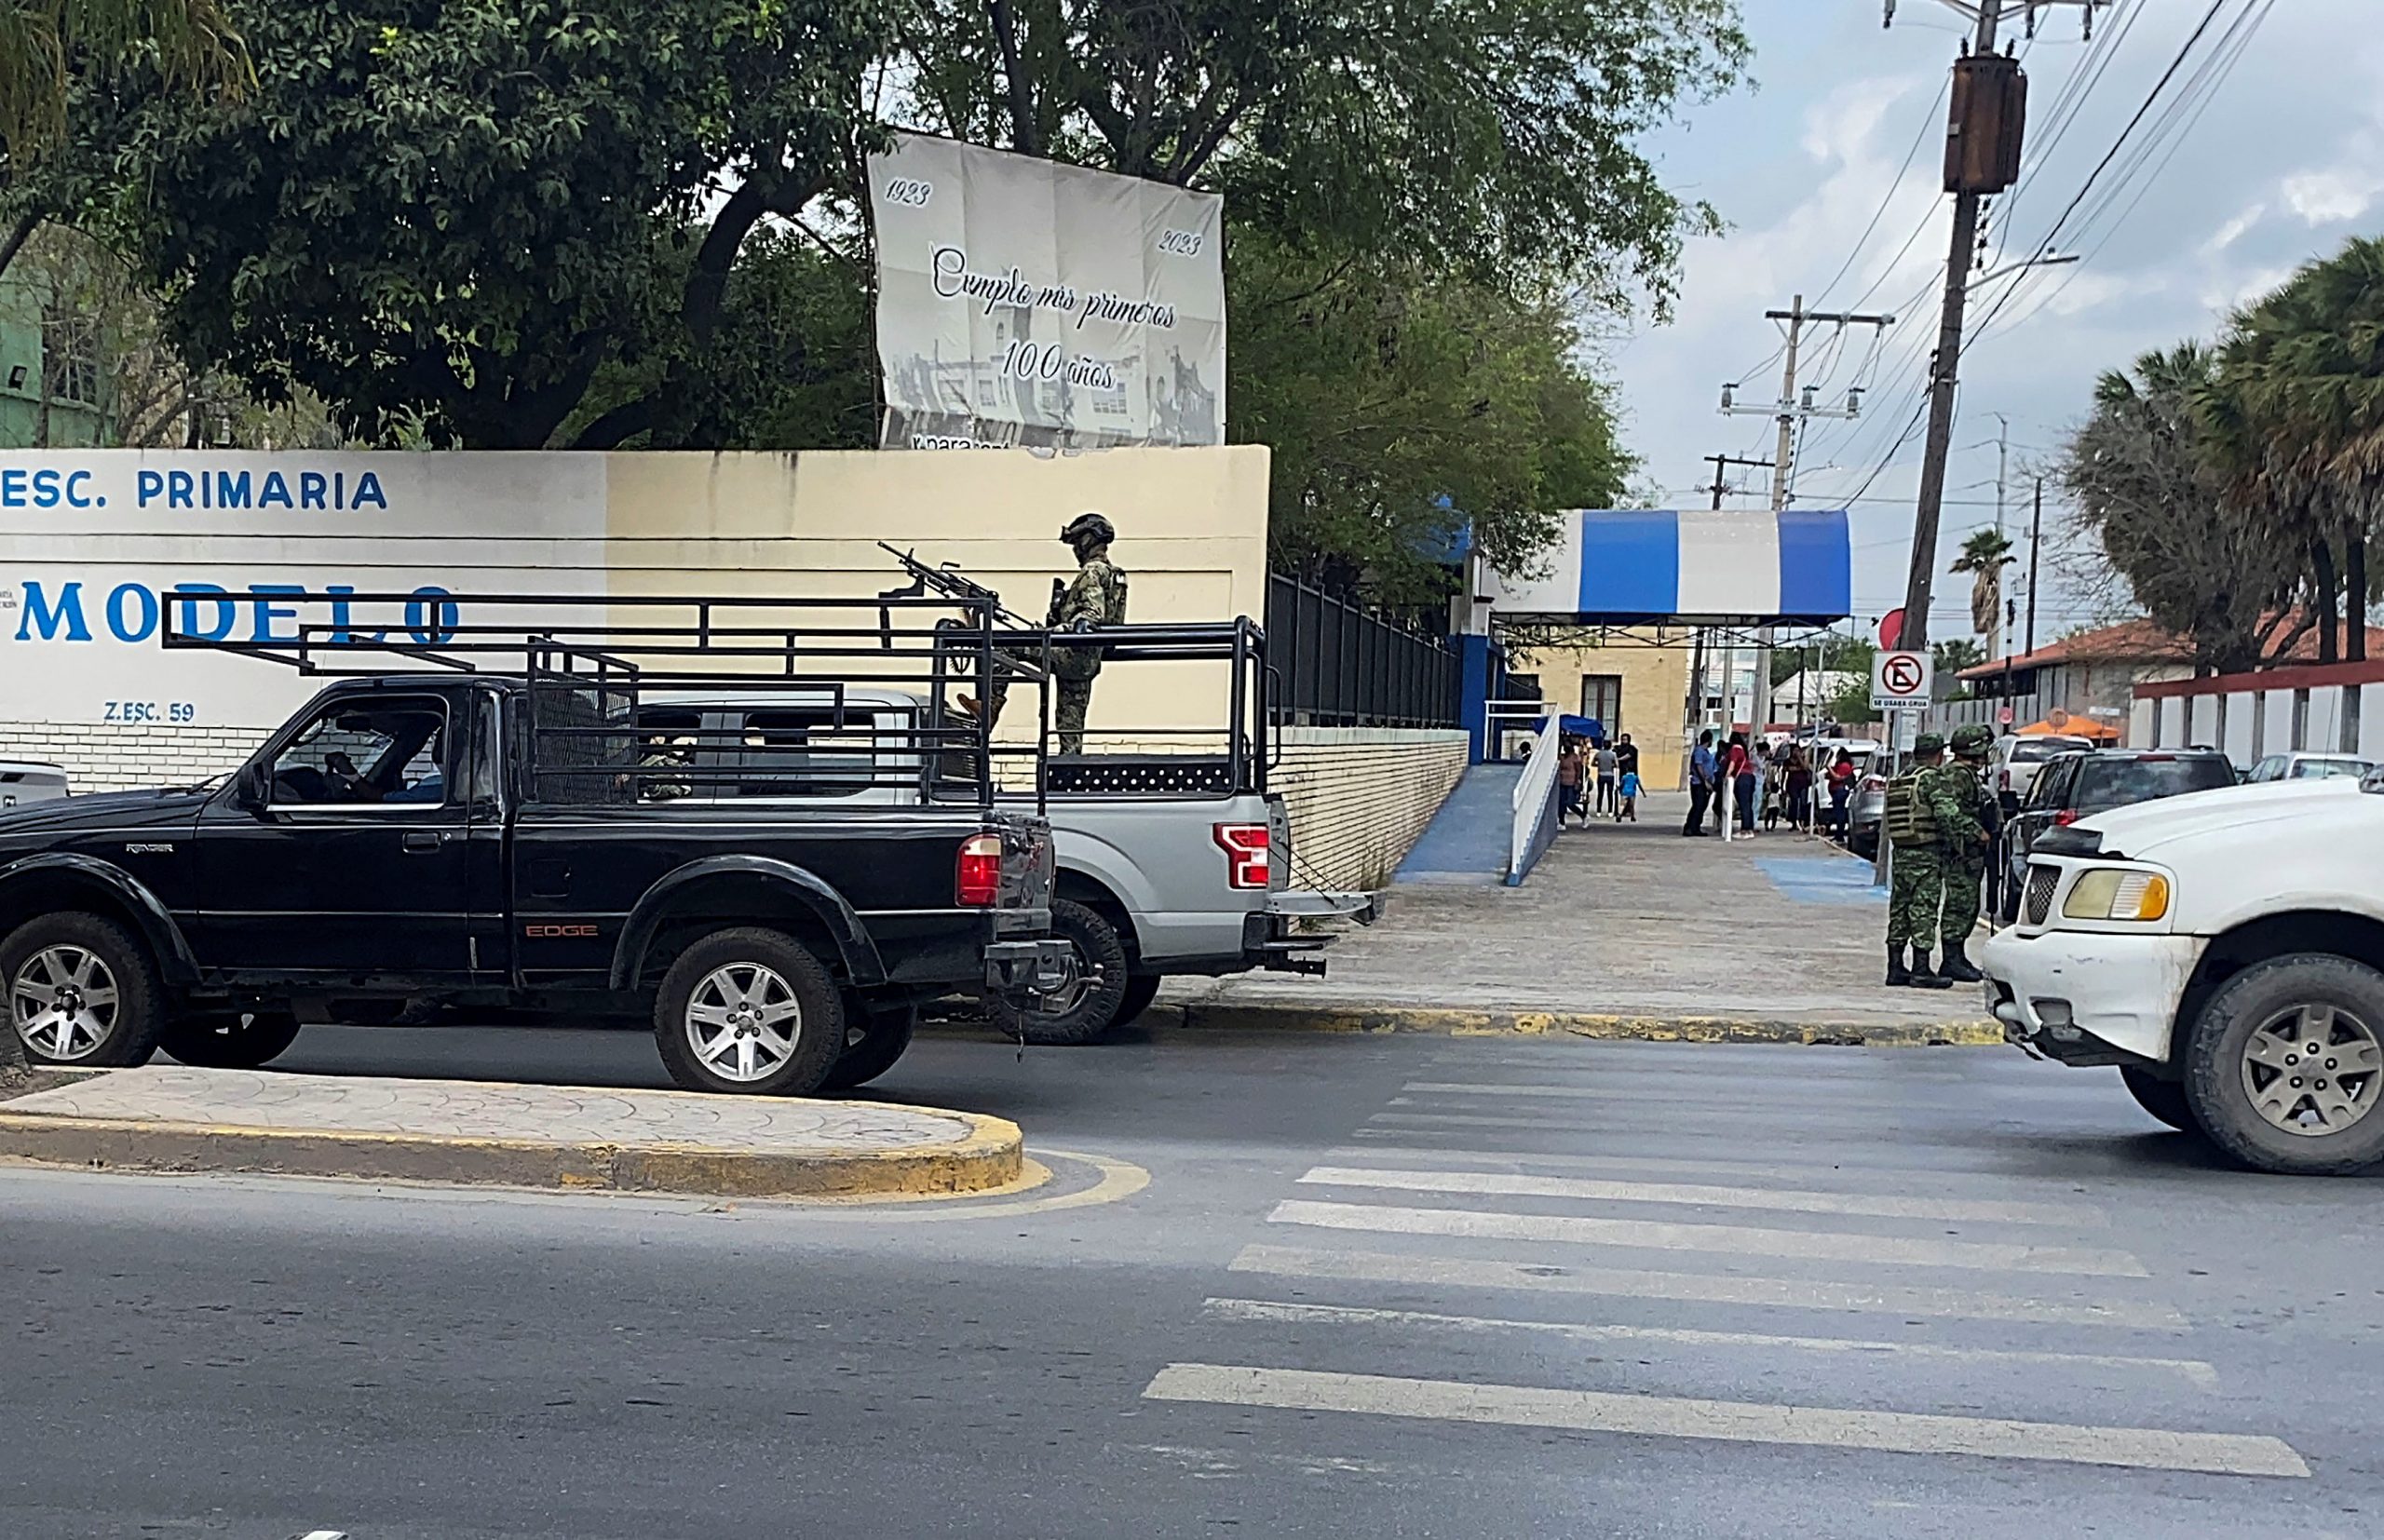 Report: Two Kidnapped Americans Found Dead in Mexico